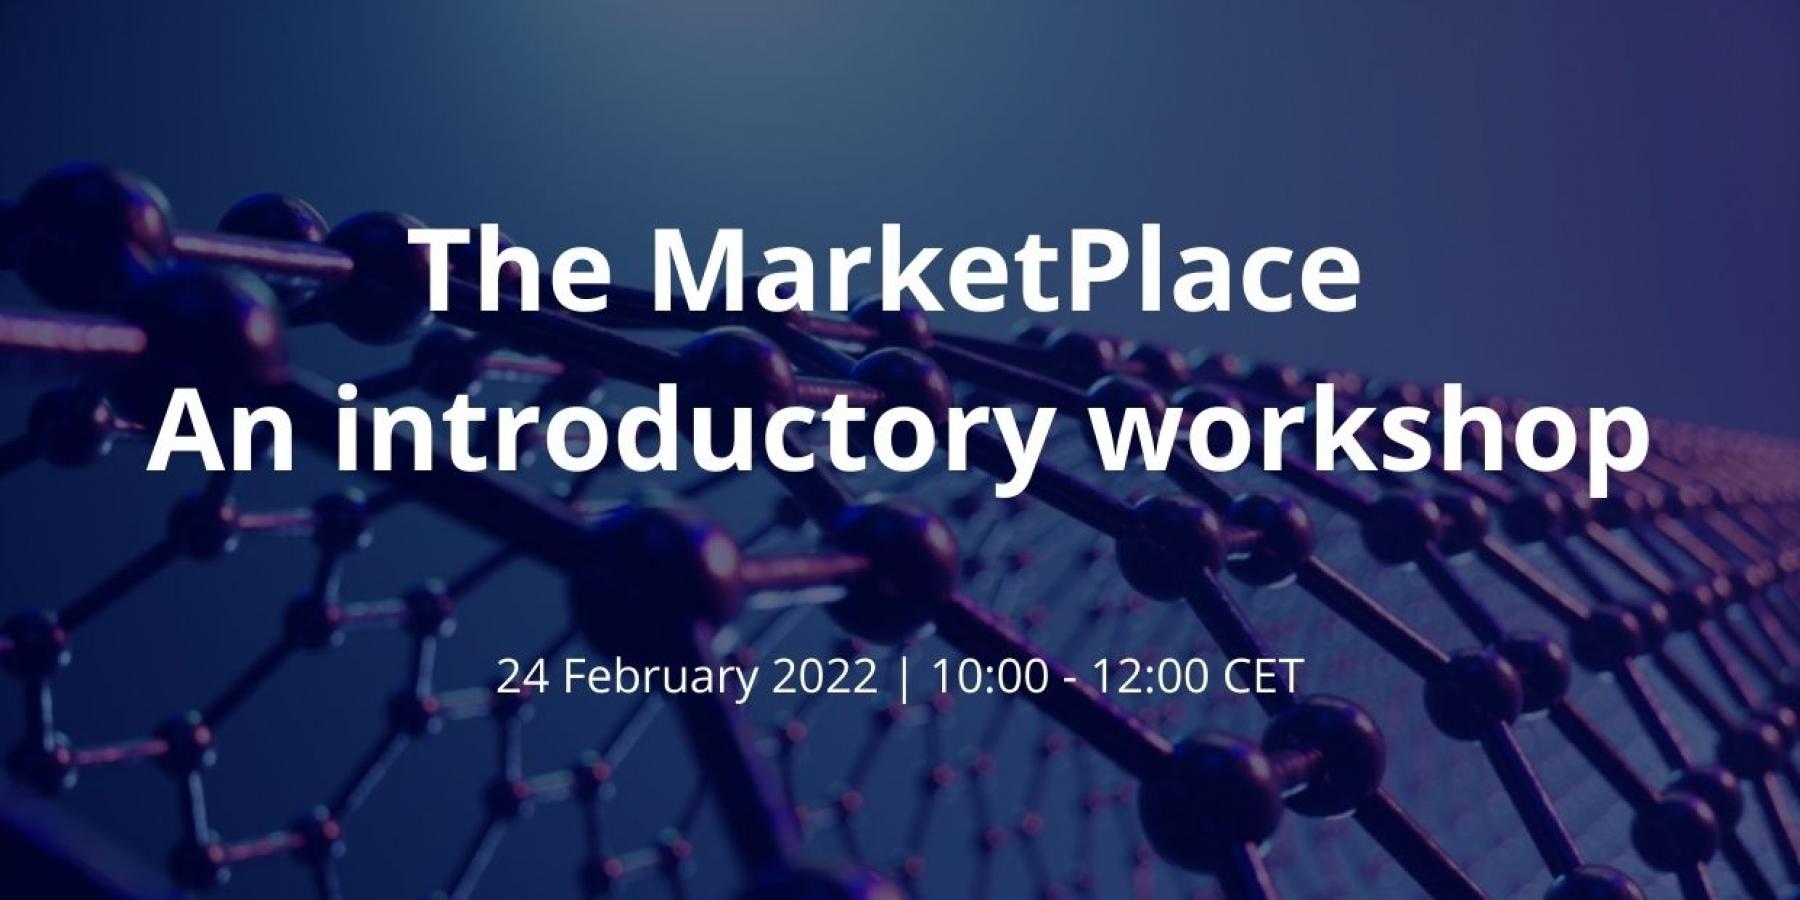 The MarketPlace introductory workshop